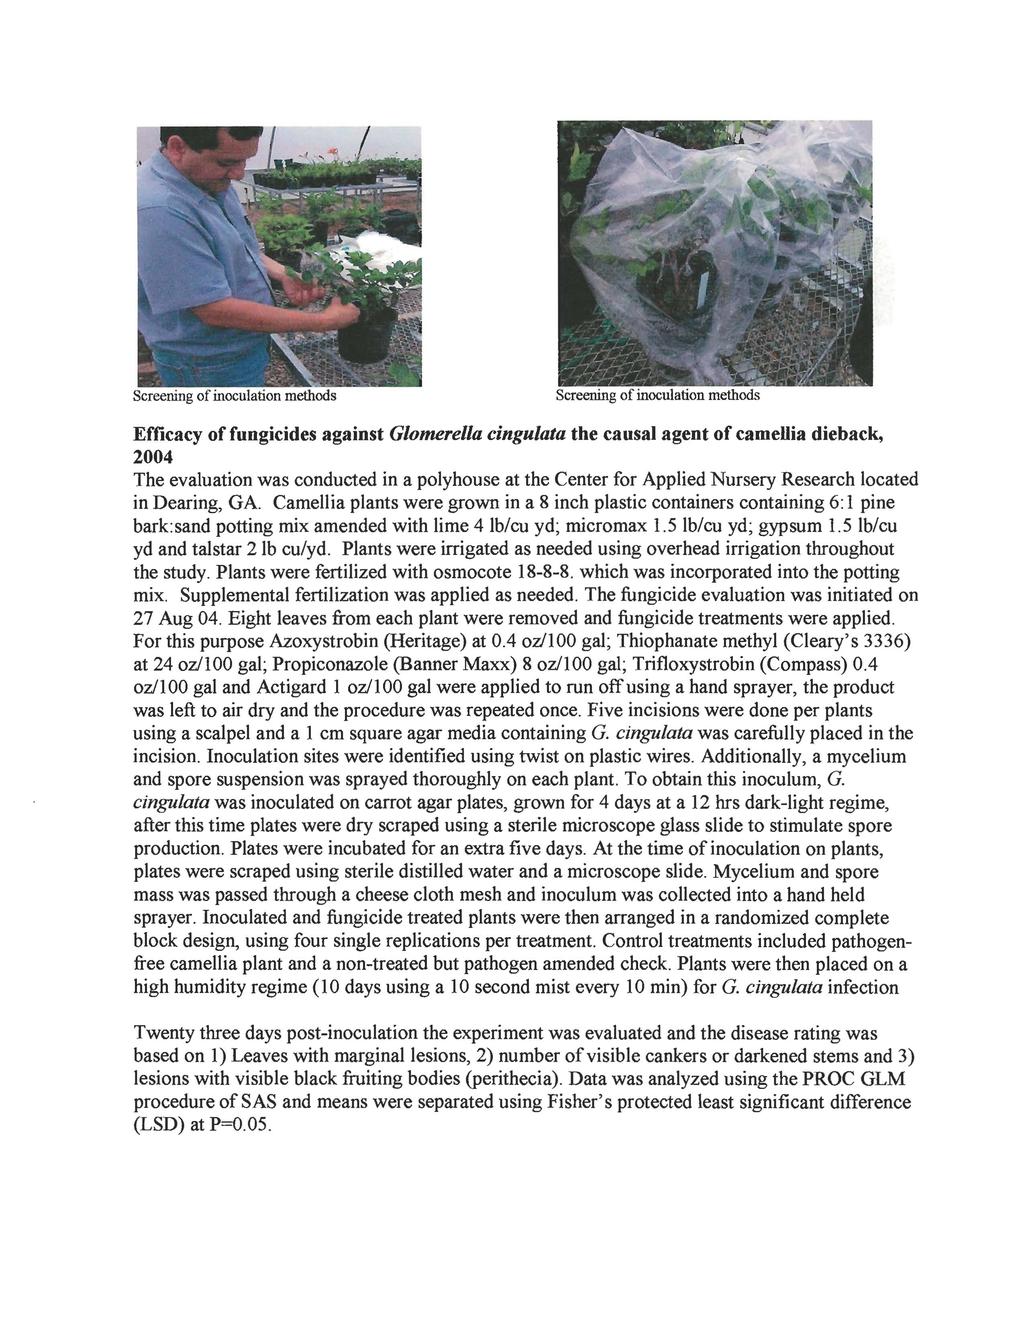 Screening of inoculation methods Efficacy of fungicides against Glomerella cingulata the causal agent of camellia dieback, 2004 The evaluation was conducted in a polyhouse at the Center for Applied